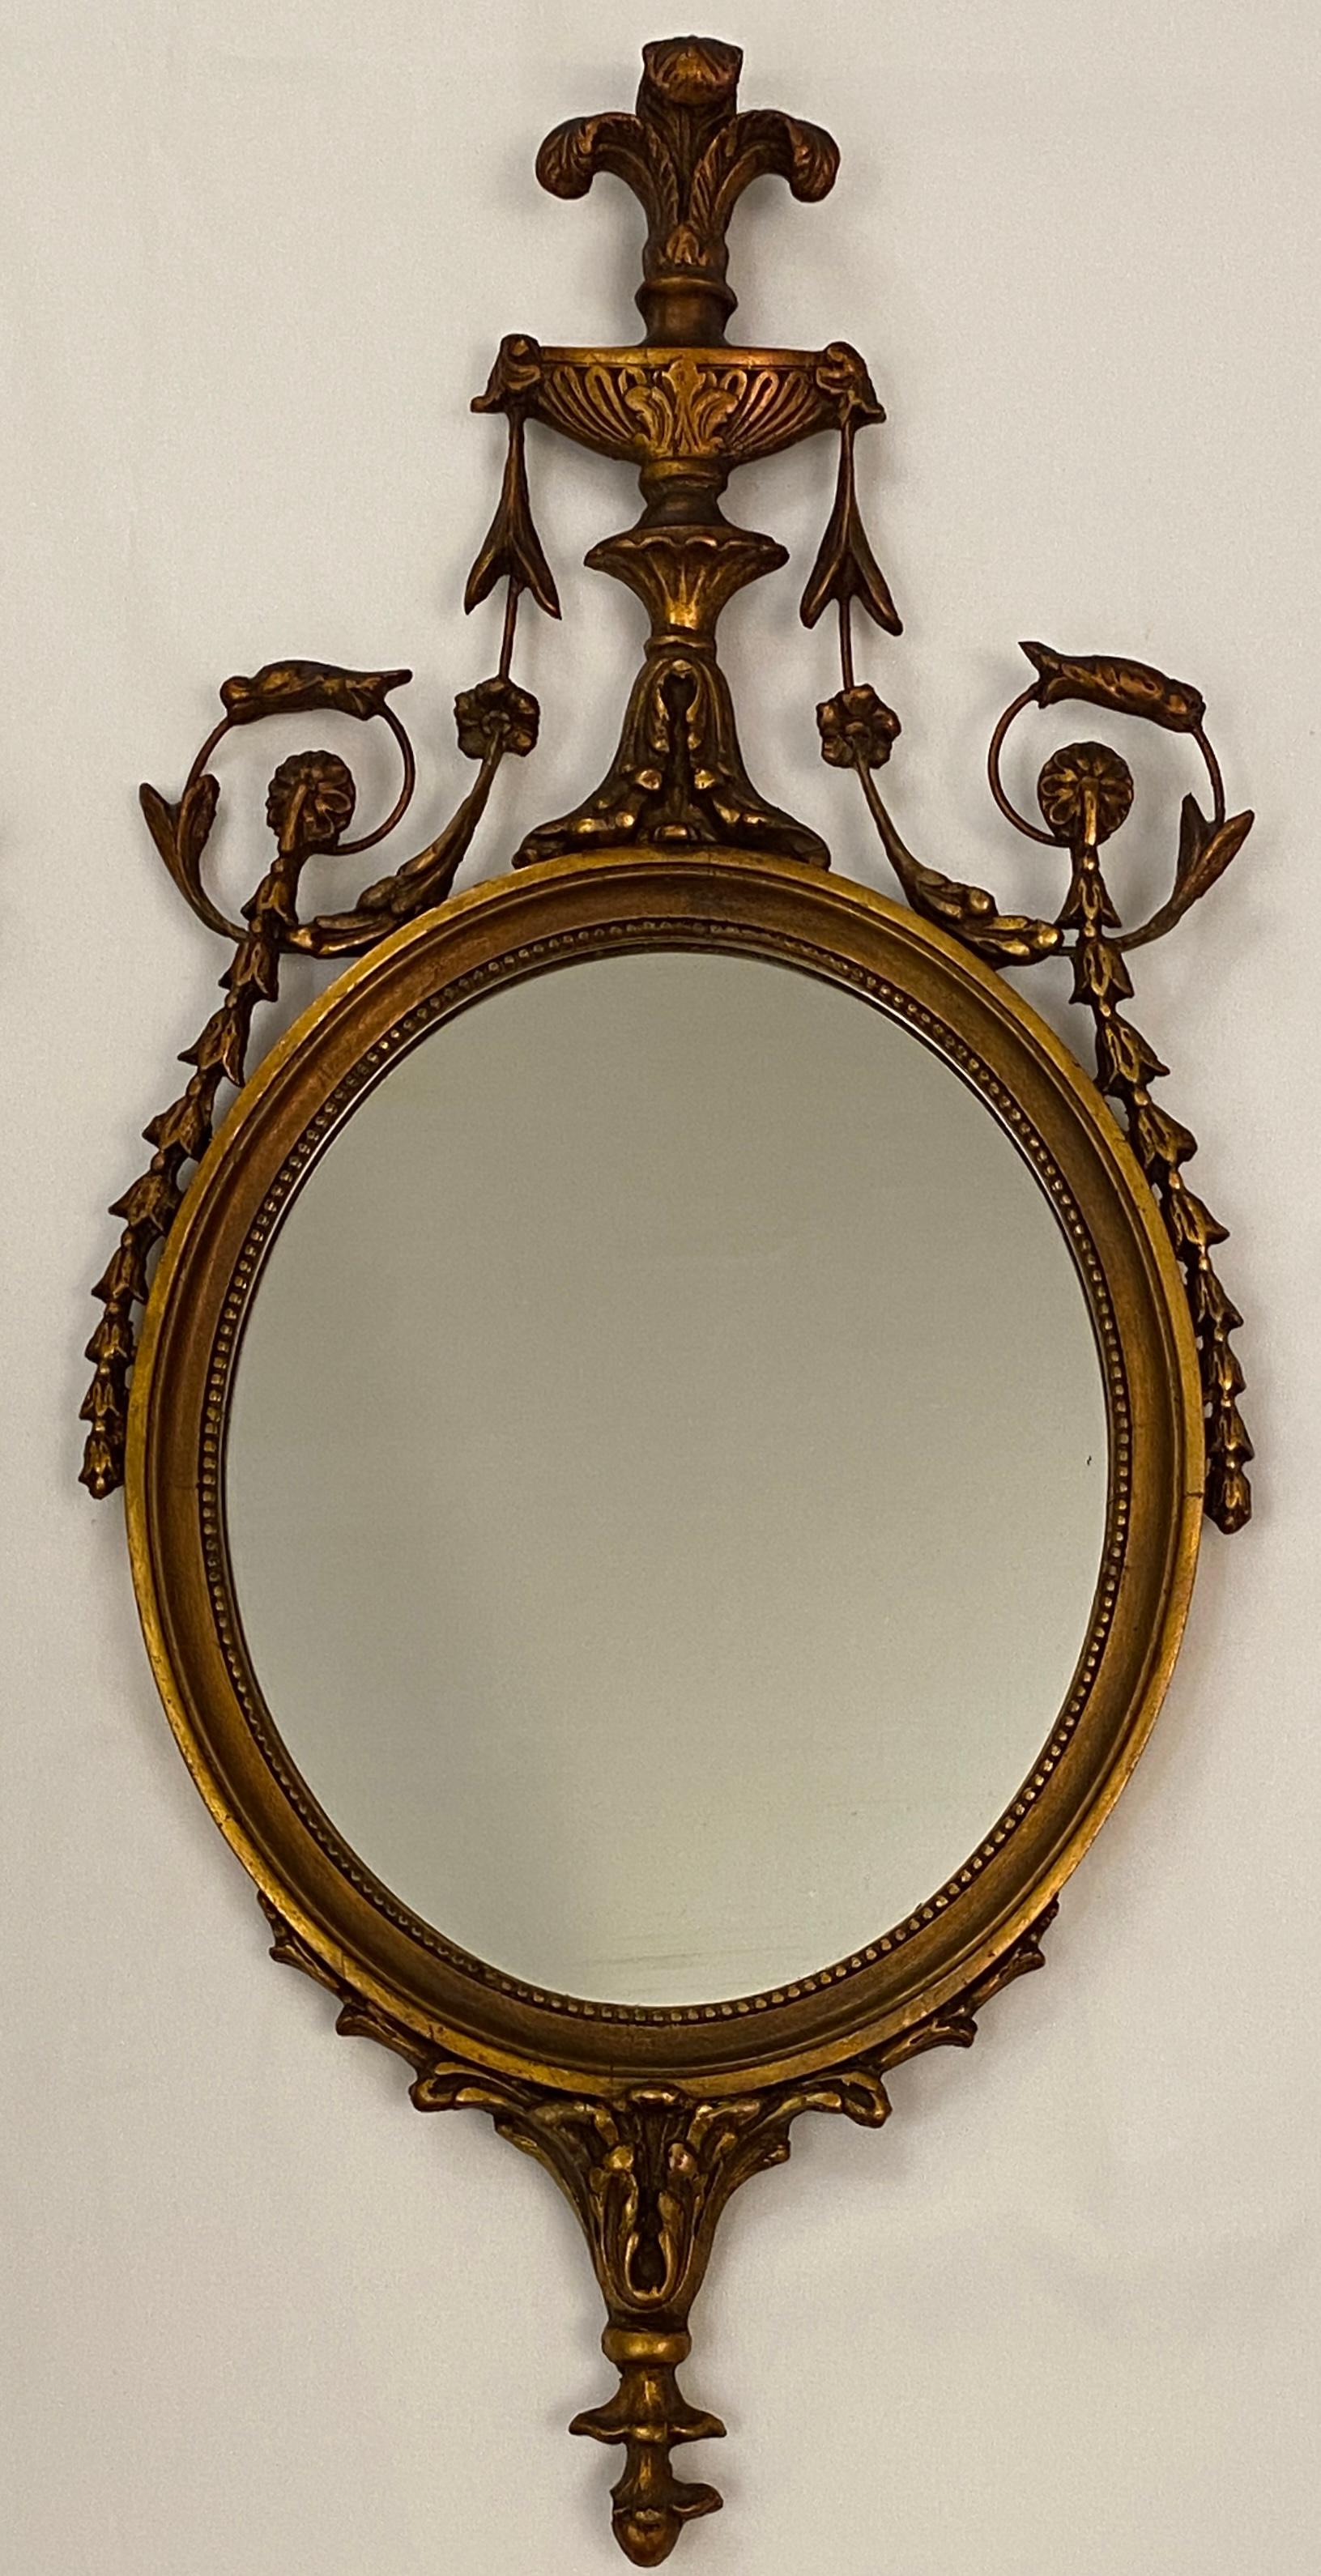 A pair of Victorian style gilded oval mirrors. The symmetrically realized mirrors feature an exquisite ornamentation inclusive of decorative garlands and rocailles.

Beautiful hand-carved details throughout this pair of Victorian style mirrors will